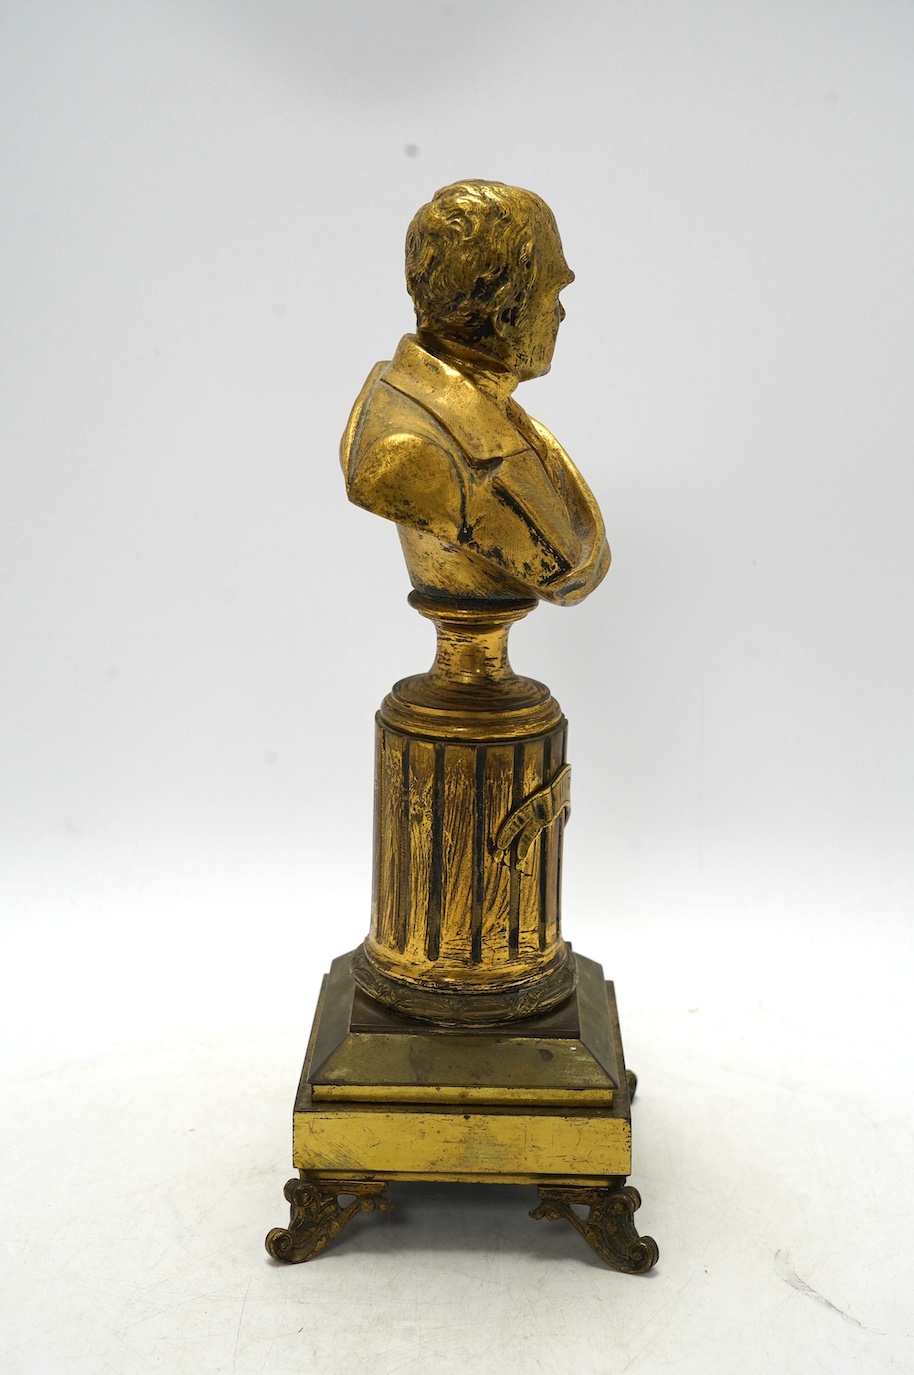 An early 20th century gilt metal bust of Sir Walter Scott on pedestal, 34cm. Condition - fair to good